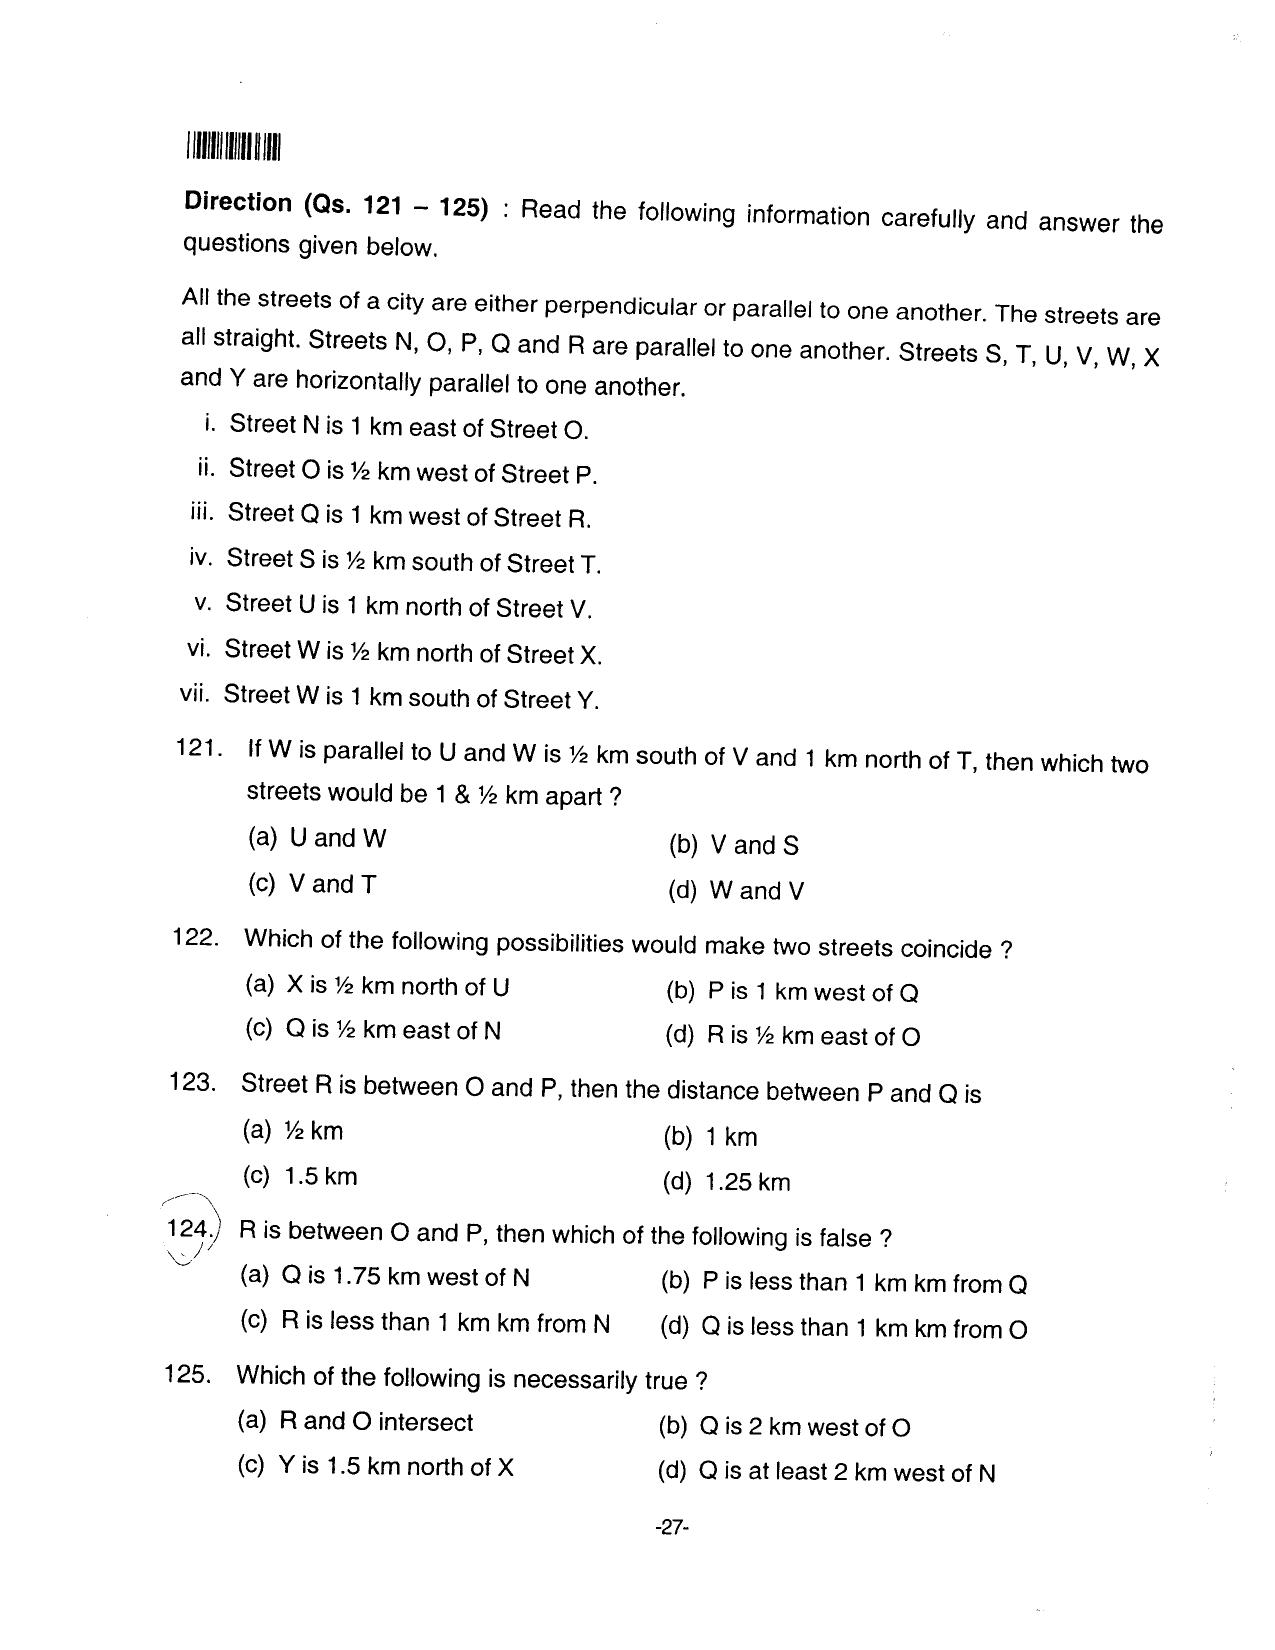 AILET 2016 Question Paper for BA LLB - Page 27